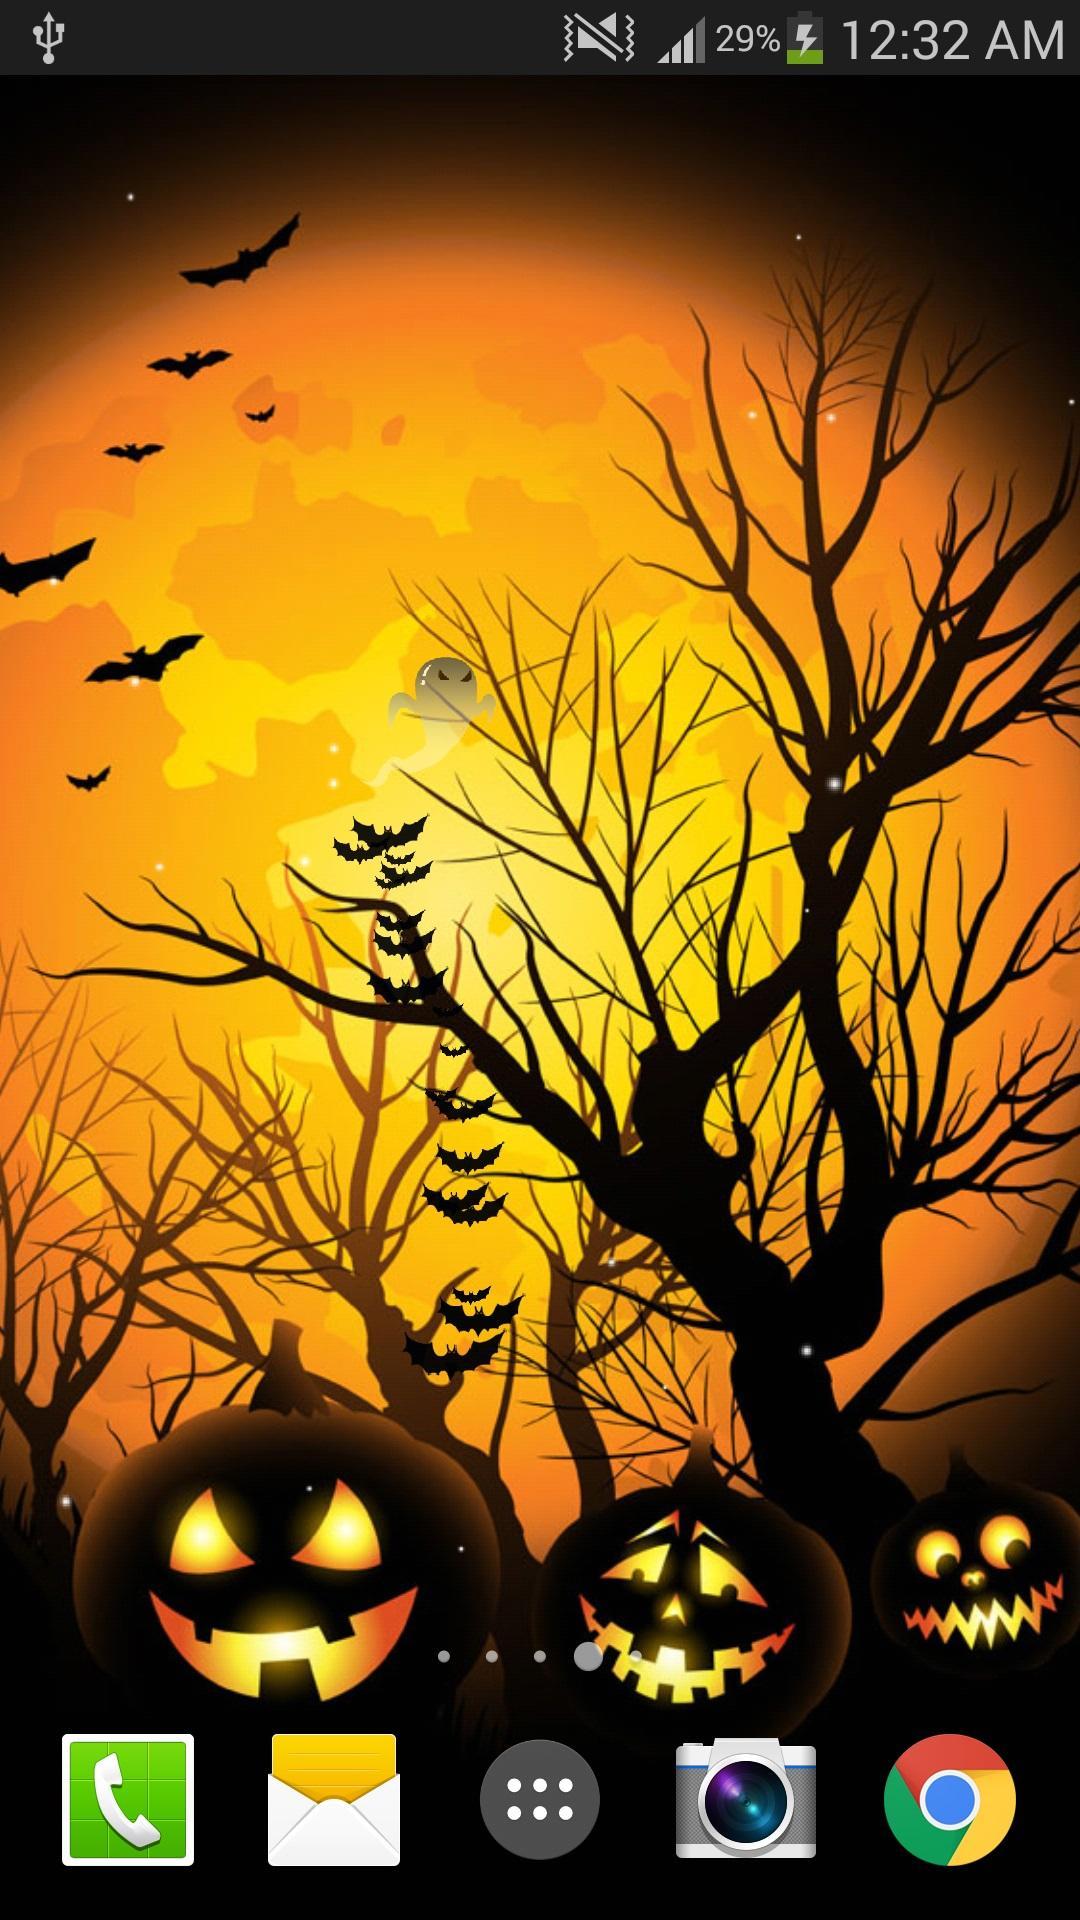 Halloween Live Wallpaper For Android Apk Download